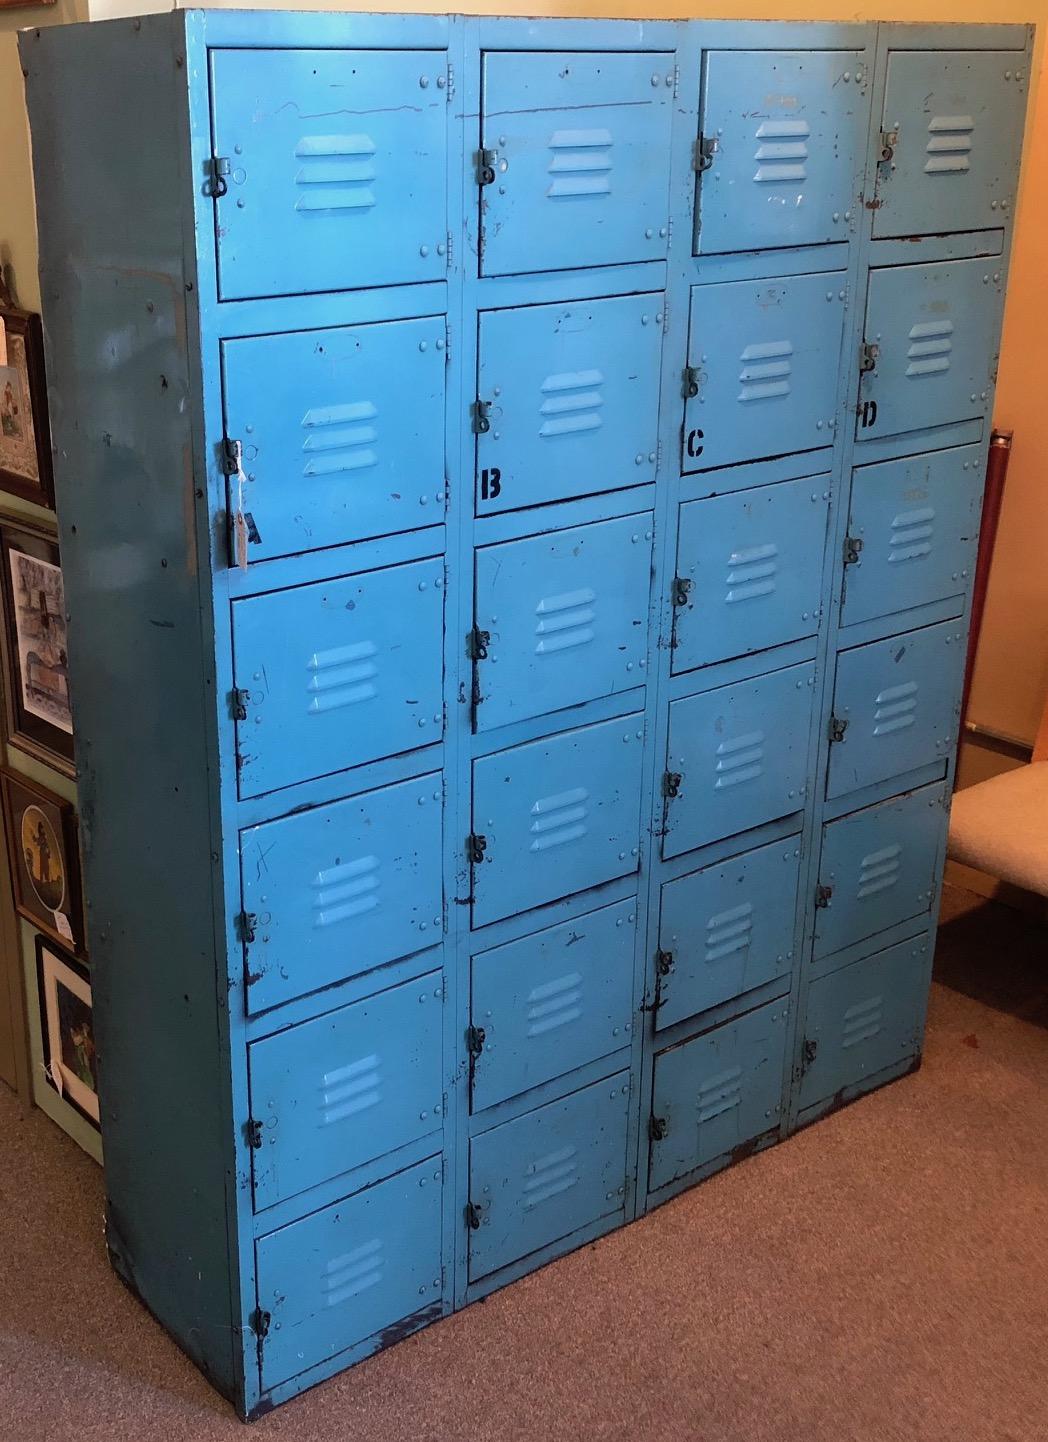 Industrial steel locker set, mid-century.  In striking, original robin's egg blue color with 24 cubbies and pulls that can be padlocked. Industrial strength with some rust and minor paint chips. Good to go in hallway, kids' room, rec room, kitchen,